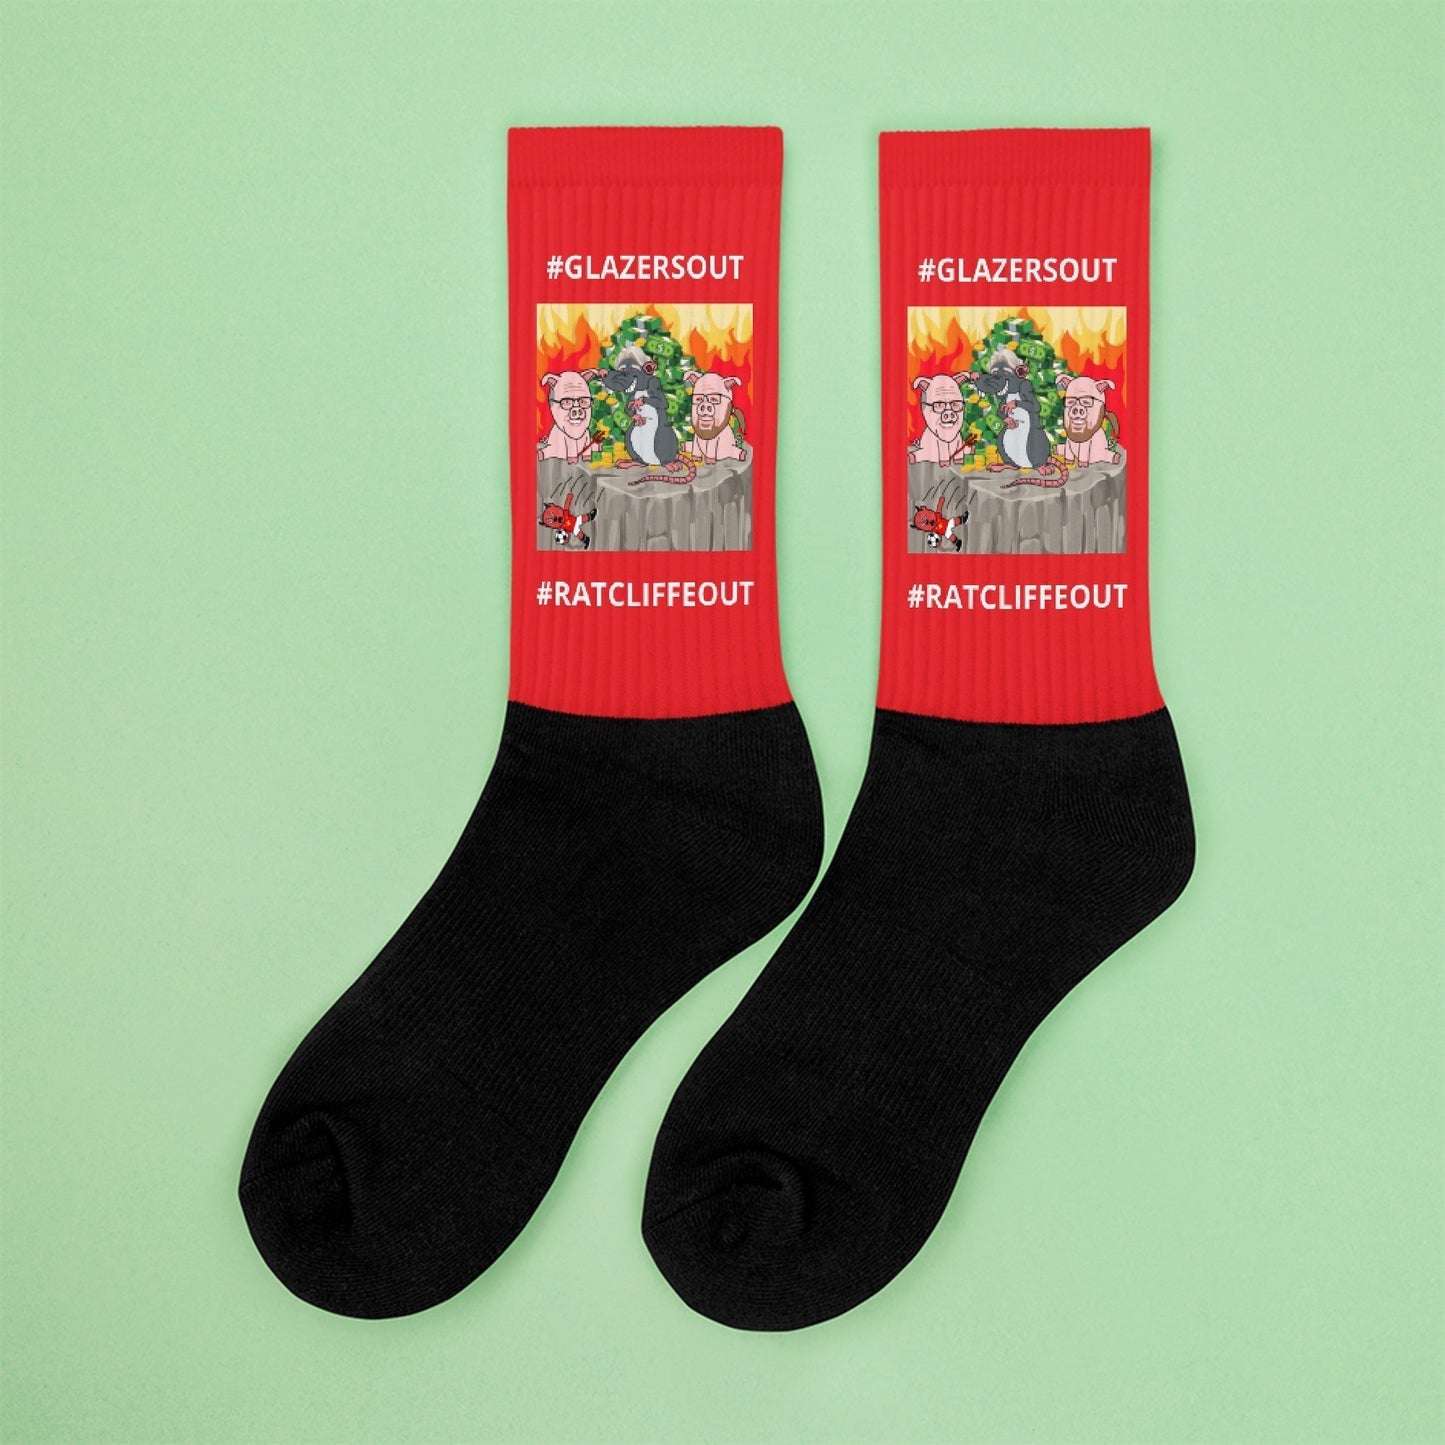 Manchester United Ratcliffe Out, Glazers Out Socks Next Cult Brand Football, GlazersOut, Manchester United, RatcliffeOut